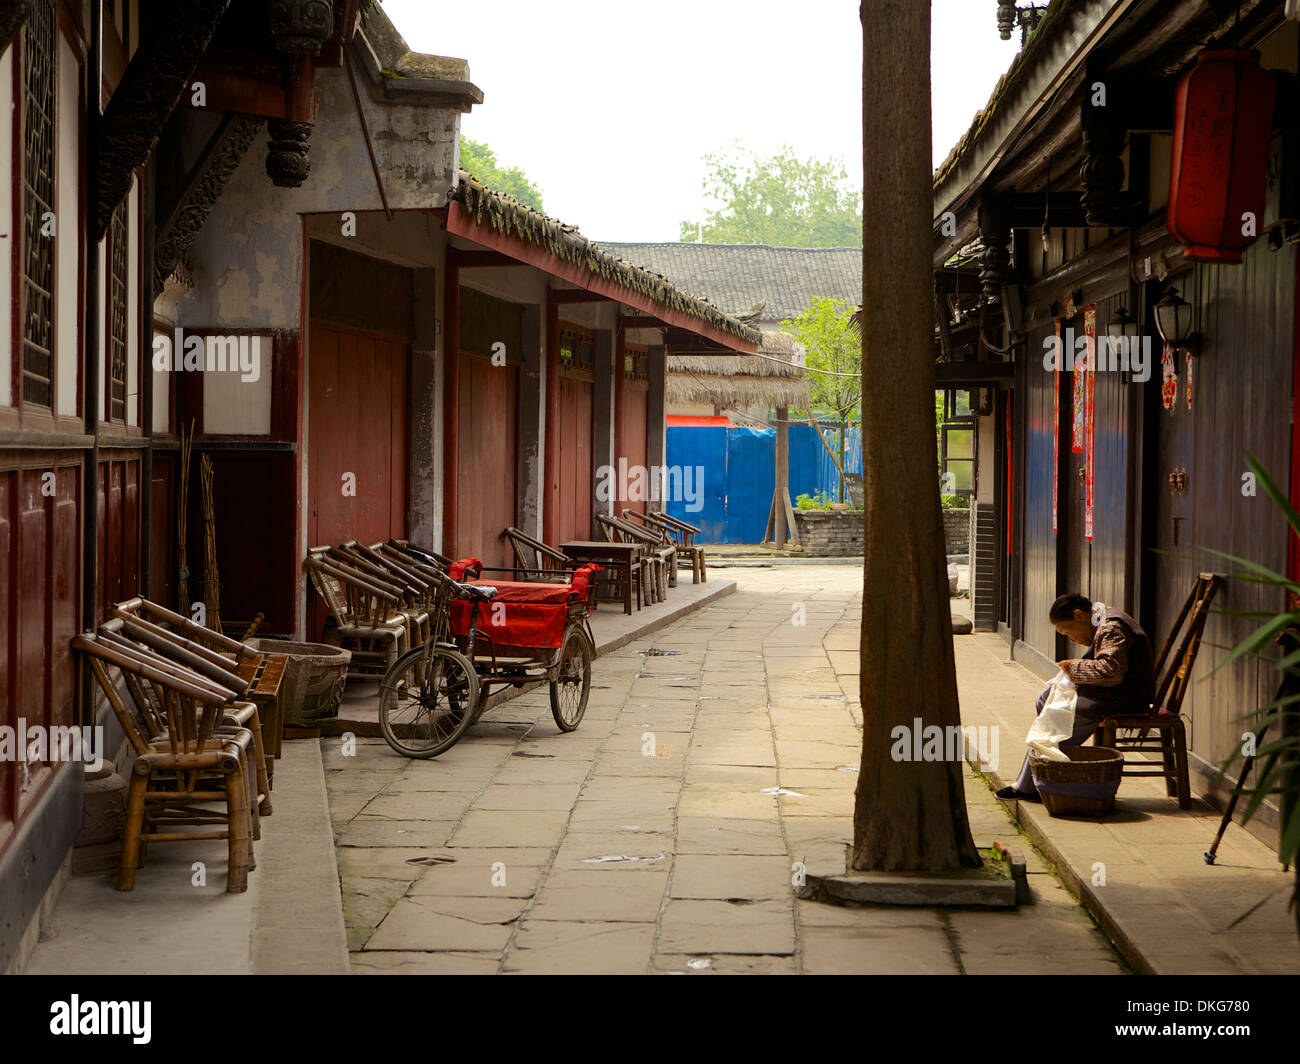 Luodai Ancient Town, Chengdu, Sichuan Province, China, Asia Stock Photo